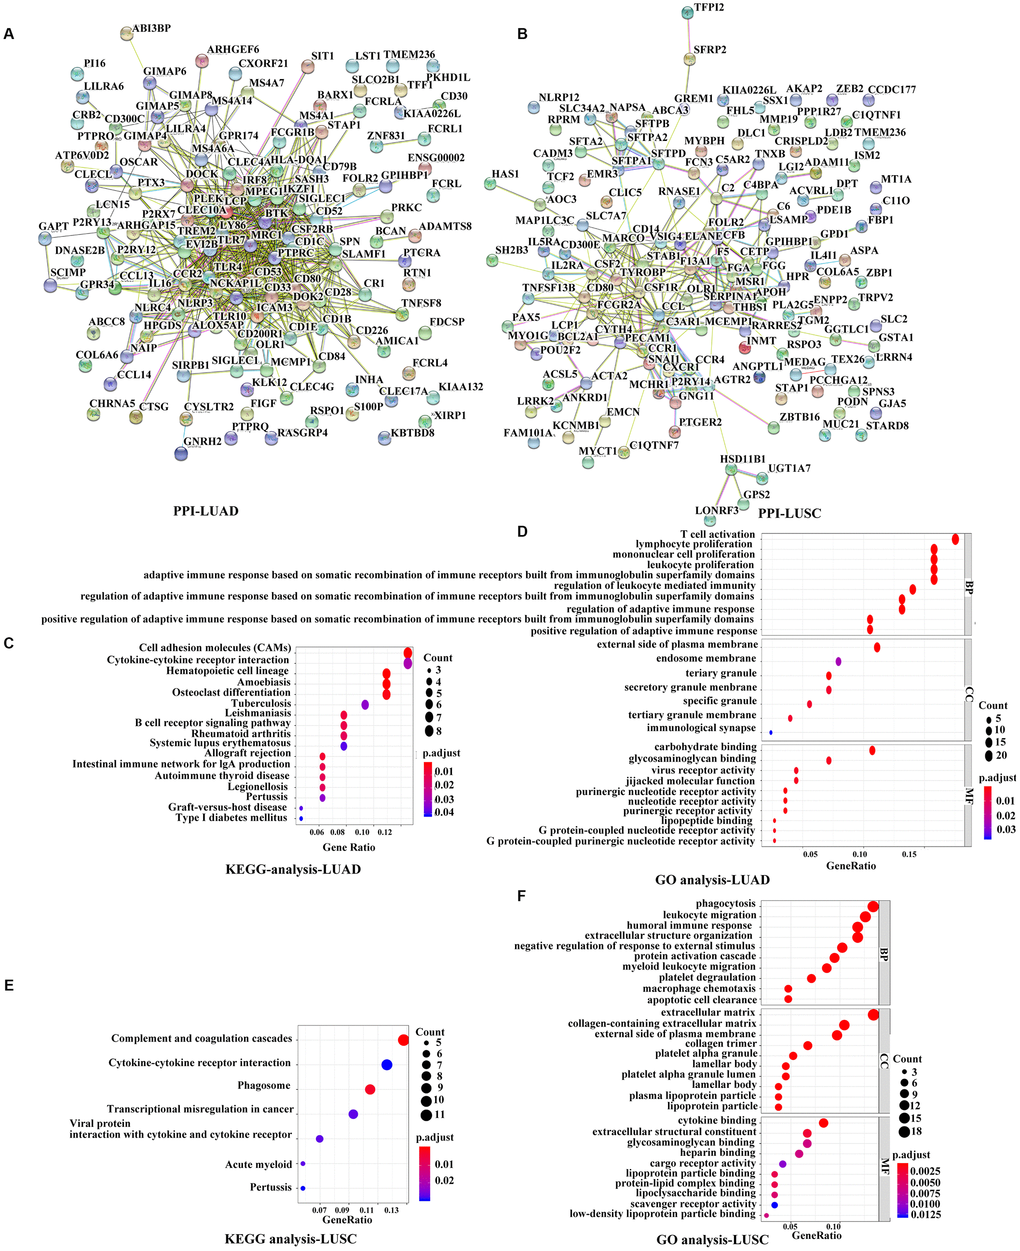 Functional analyses of immune-related prognostic genes. (A, B) PPI networks of the prognostic DEGs determined by the STRING database. The color of each node in the PPI network reflects the log fold-change value of the Z score of gene expression, and the size of the node indicates the number of proteins interacting with the designated protein. (C, E) KEGG analysis of immune-related prognostic genes. Top pathways with P D, F) GO analyses of the prognostic DEGs in the categories of biological processes (BP), cellular components (CC), and molecular functions (MF). PPI, Protein-protein interaction, DEGs, differentially expressed genes; GO, Gene Ontology; KEGG, Kyoto Encyclopedia of Genes and Genomes.